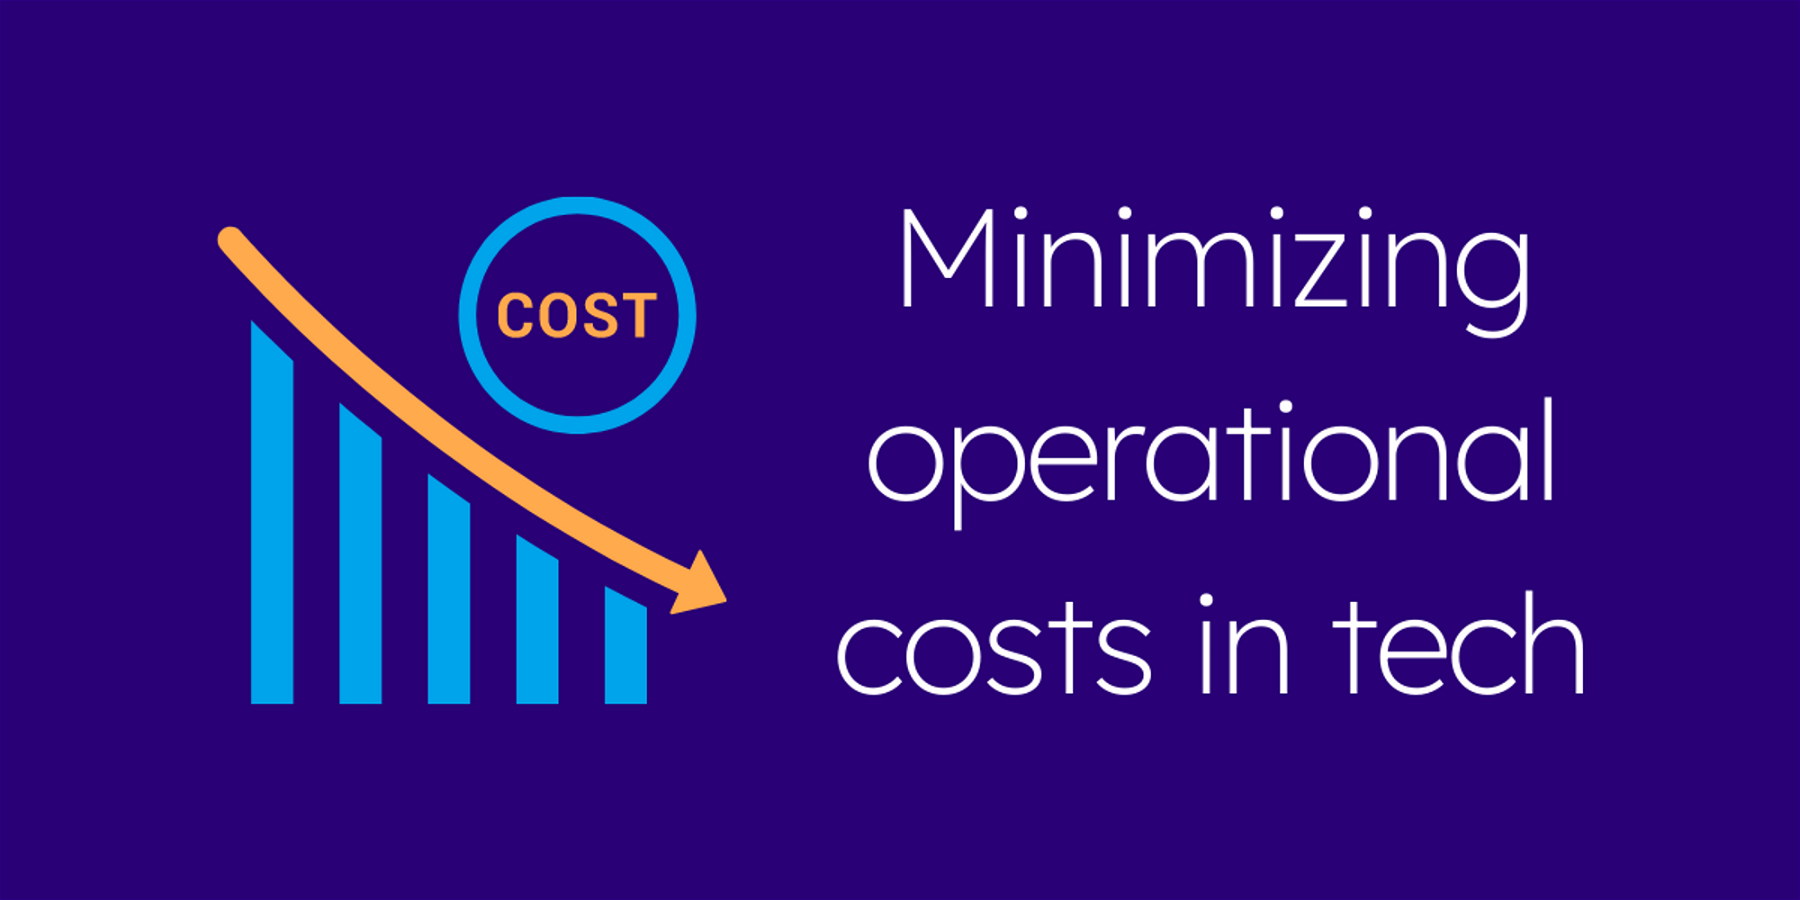 Minimizing operating costs in tech teams/startups – 7 Tactics and best practices